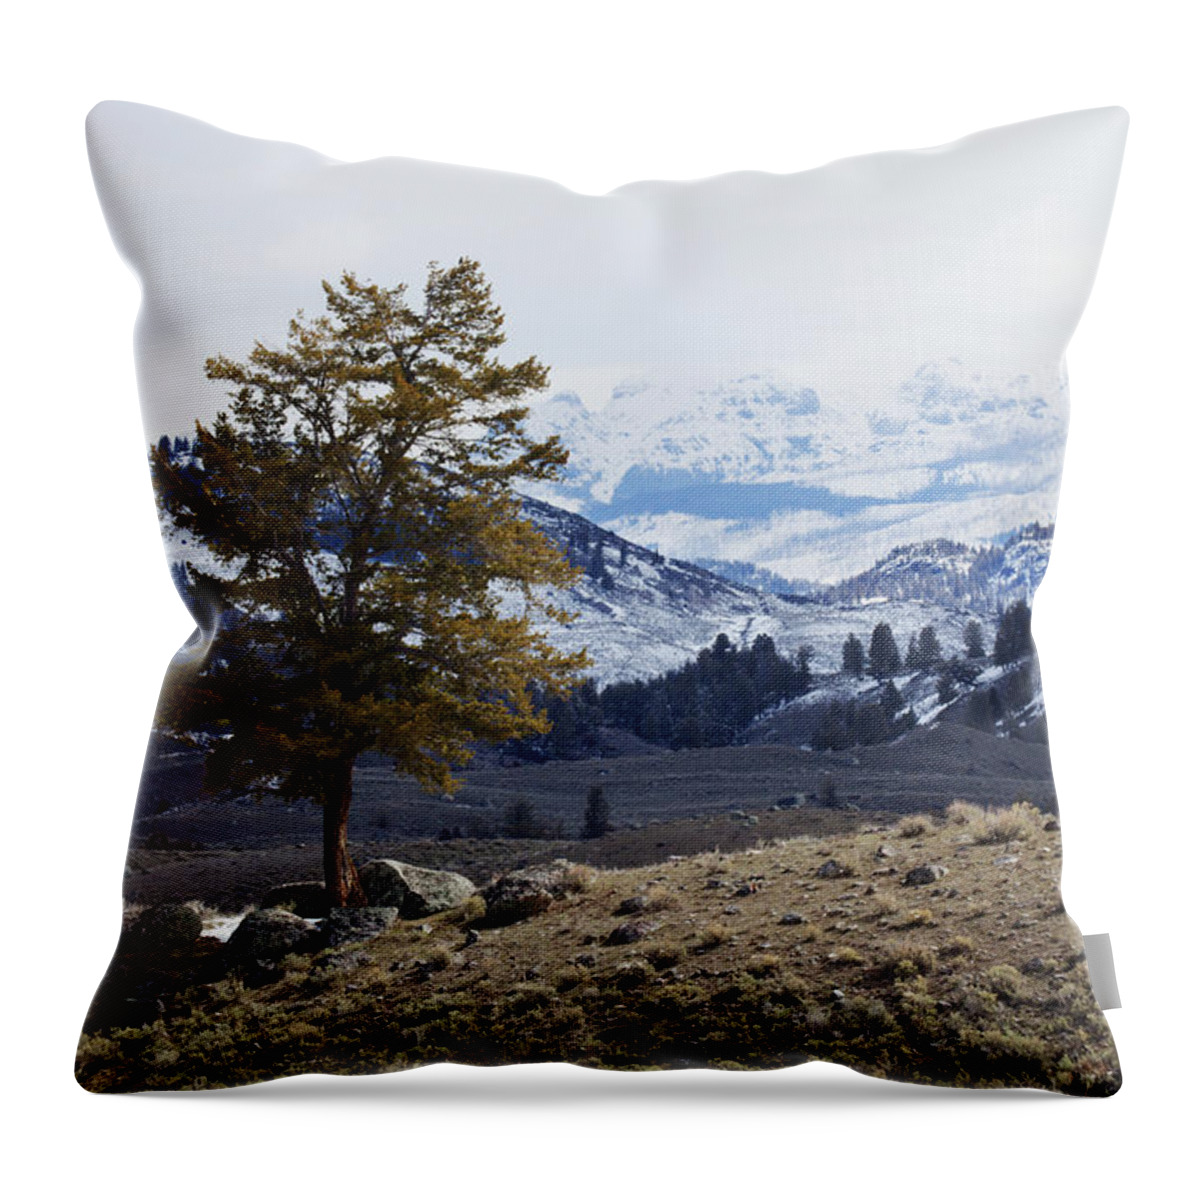 People Throw Pillow featuring the photograph Lone Tree On A Mountain Side In by Susan Dykstra / Design Pics